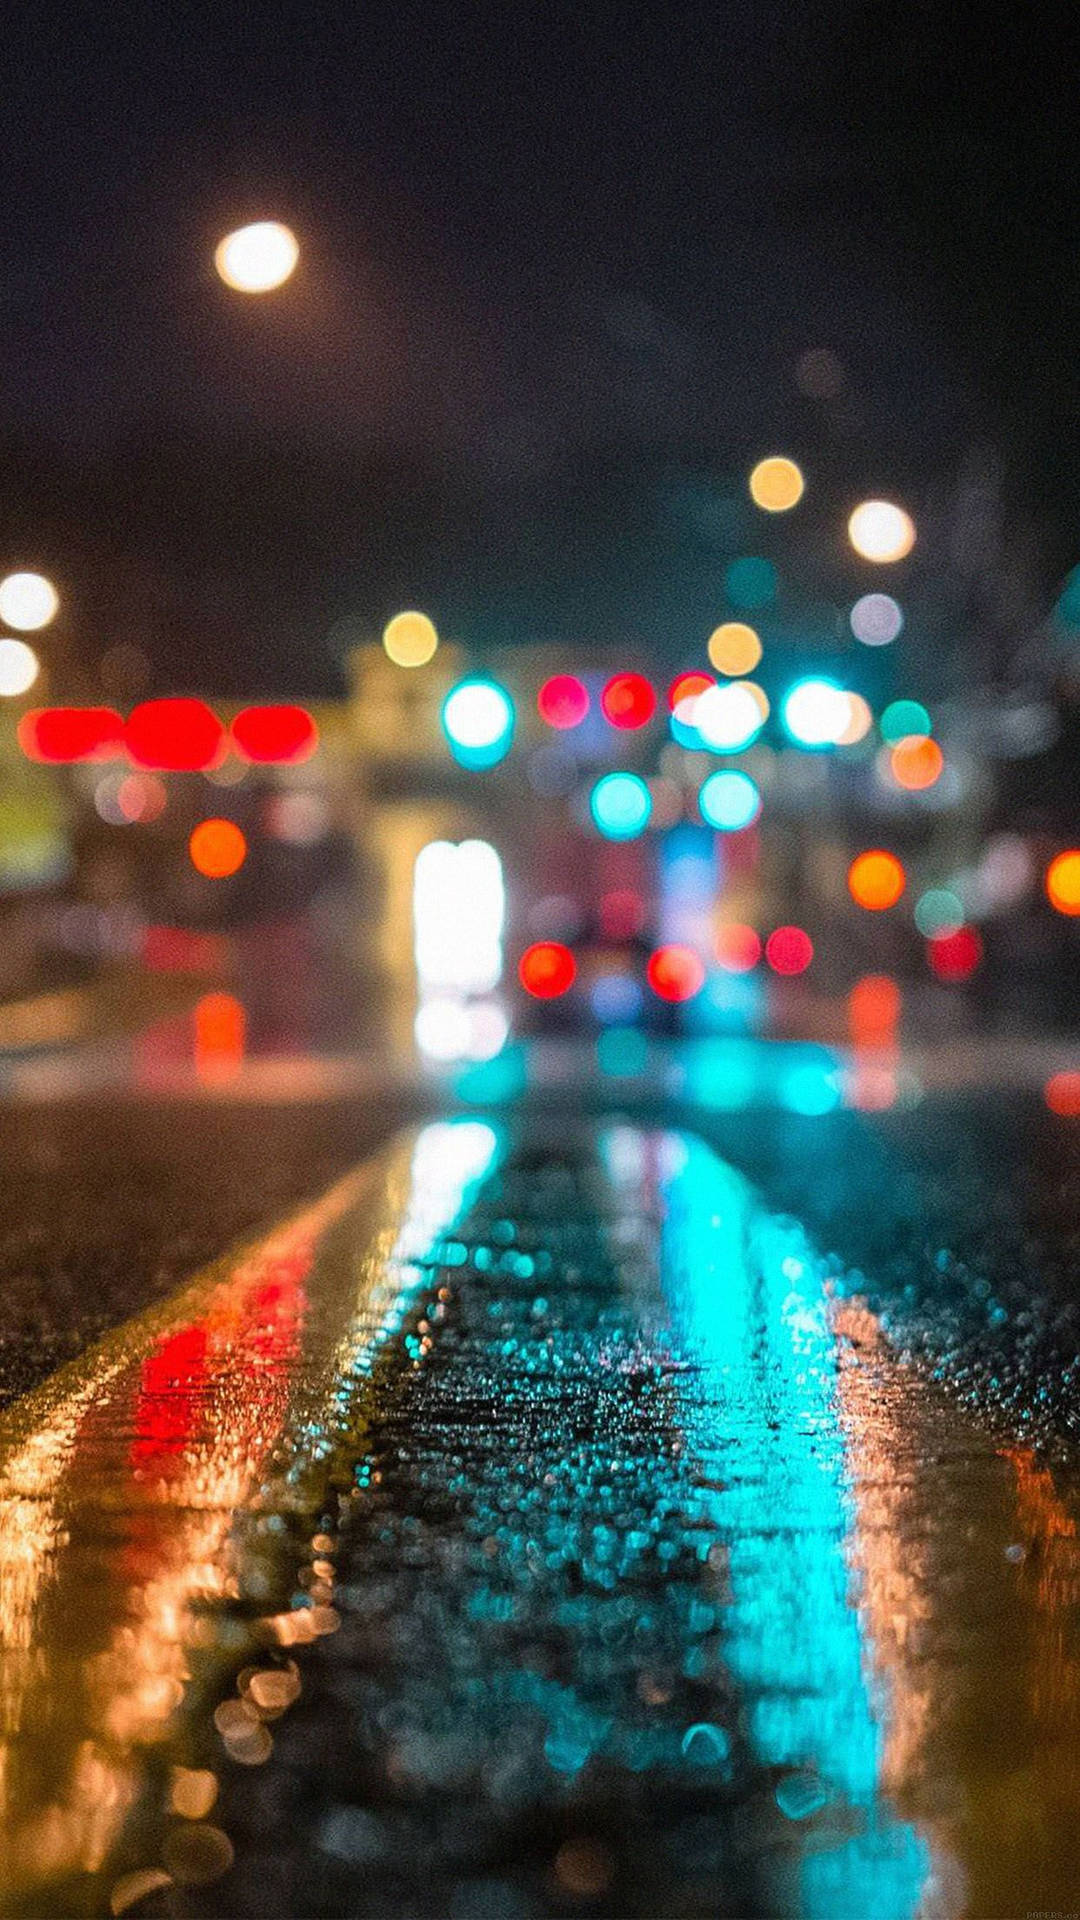 HD wallpaper of wet road and blurry city lights at night.